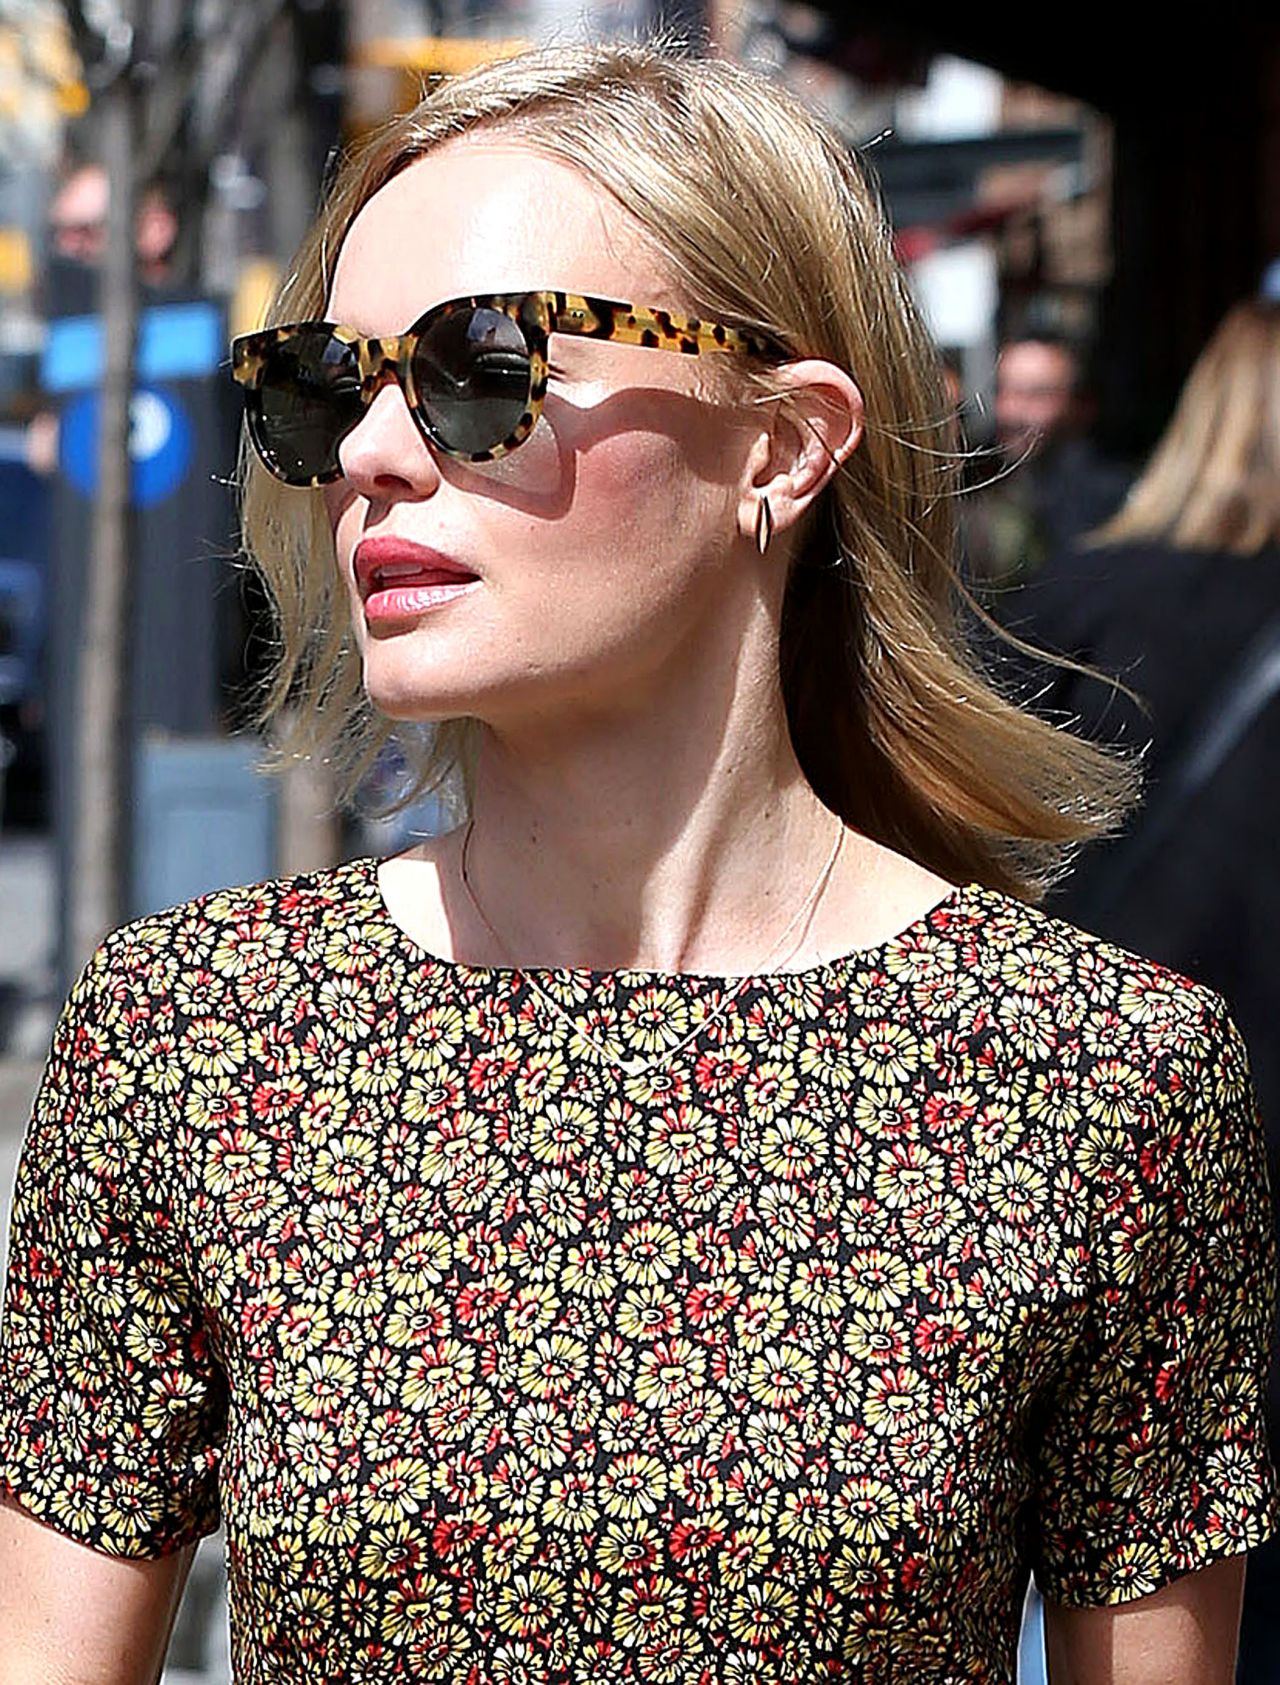 Kate Bosworth Los Angeles October 30, 2015 – Star Style